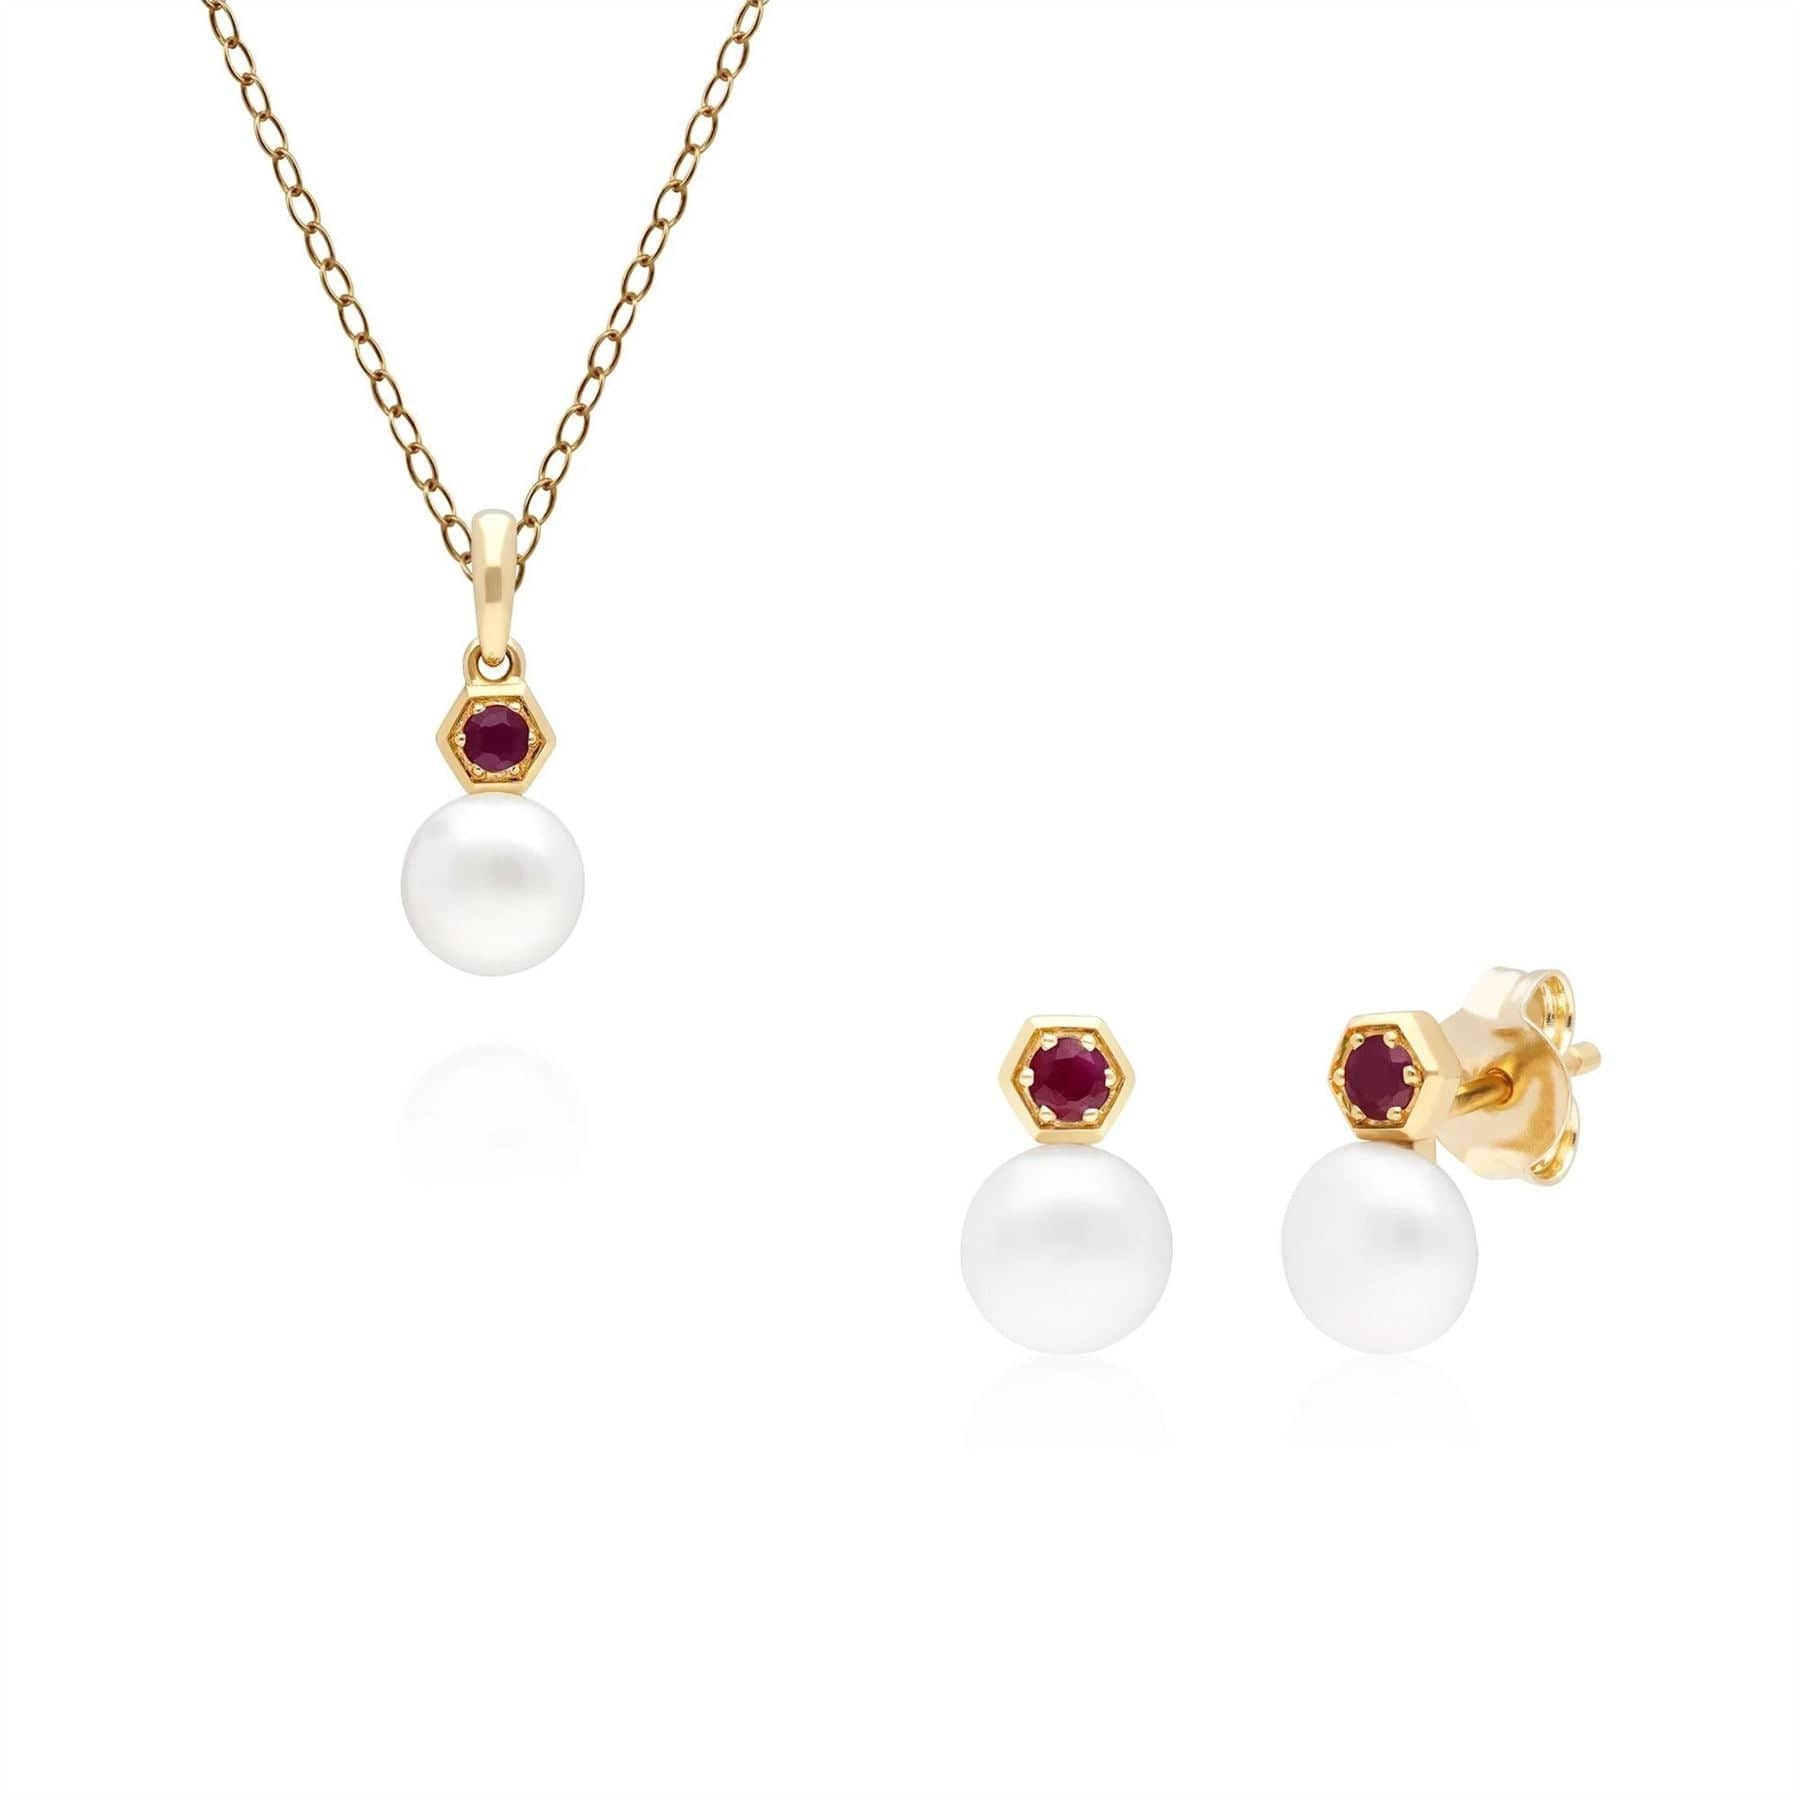 135P1965029-135E1633029 Modern Pearl & Ruby Earring & Pendant Set in 9ct Gold 1